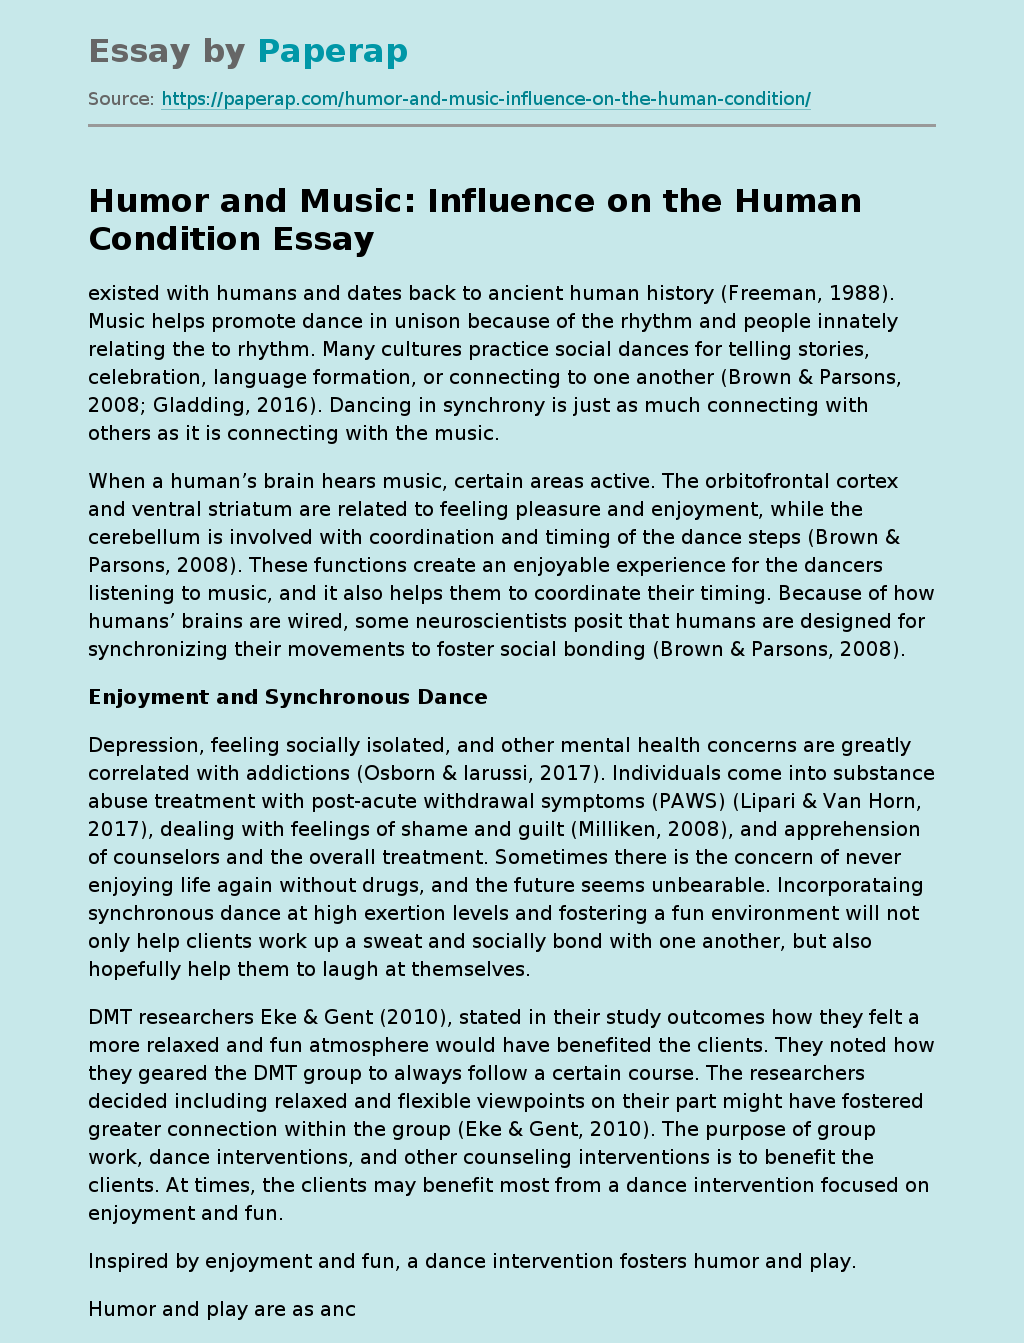 Humor and Music: Influence on the Human Condition